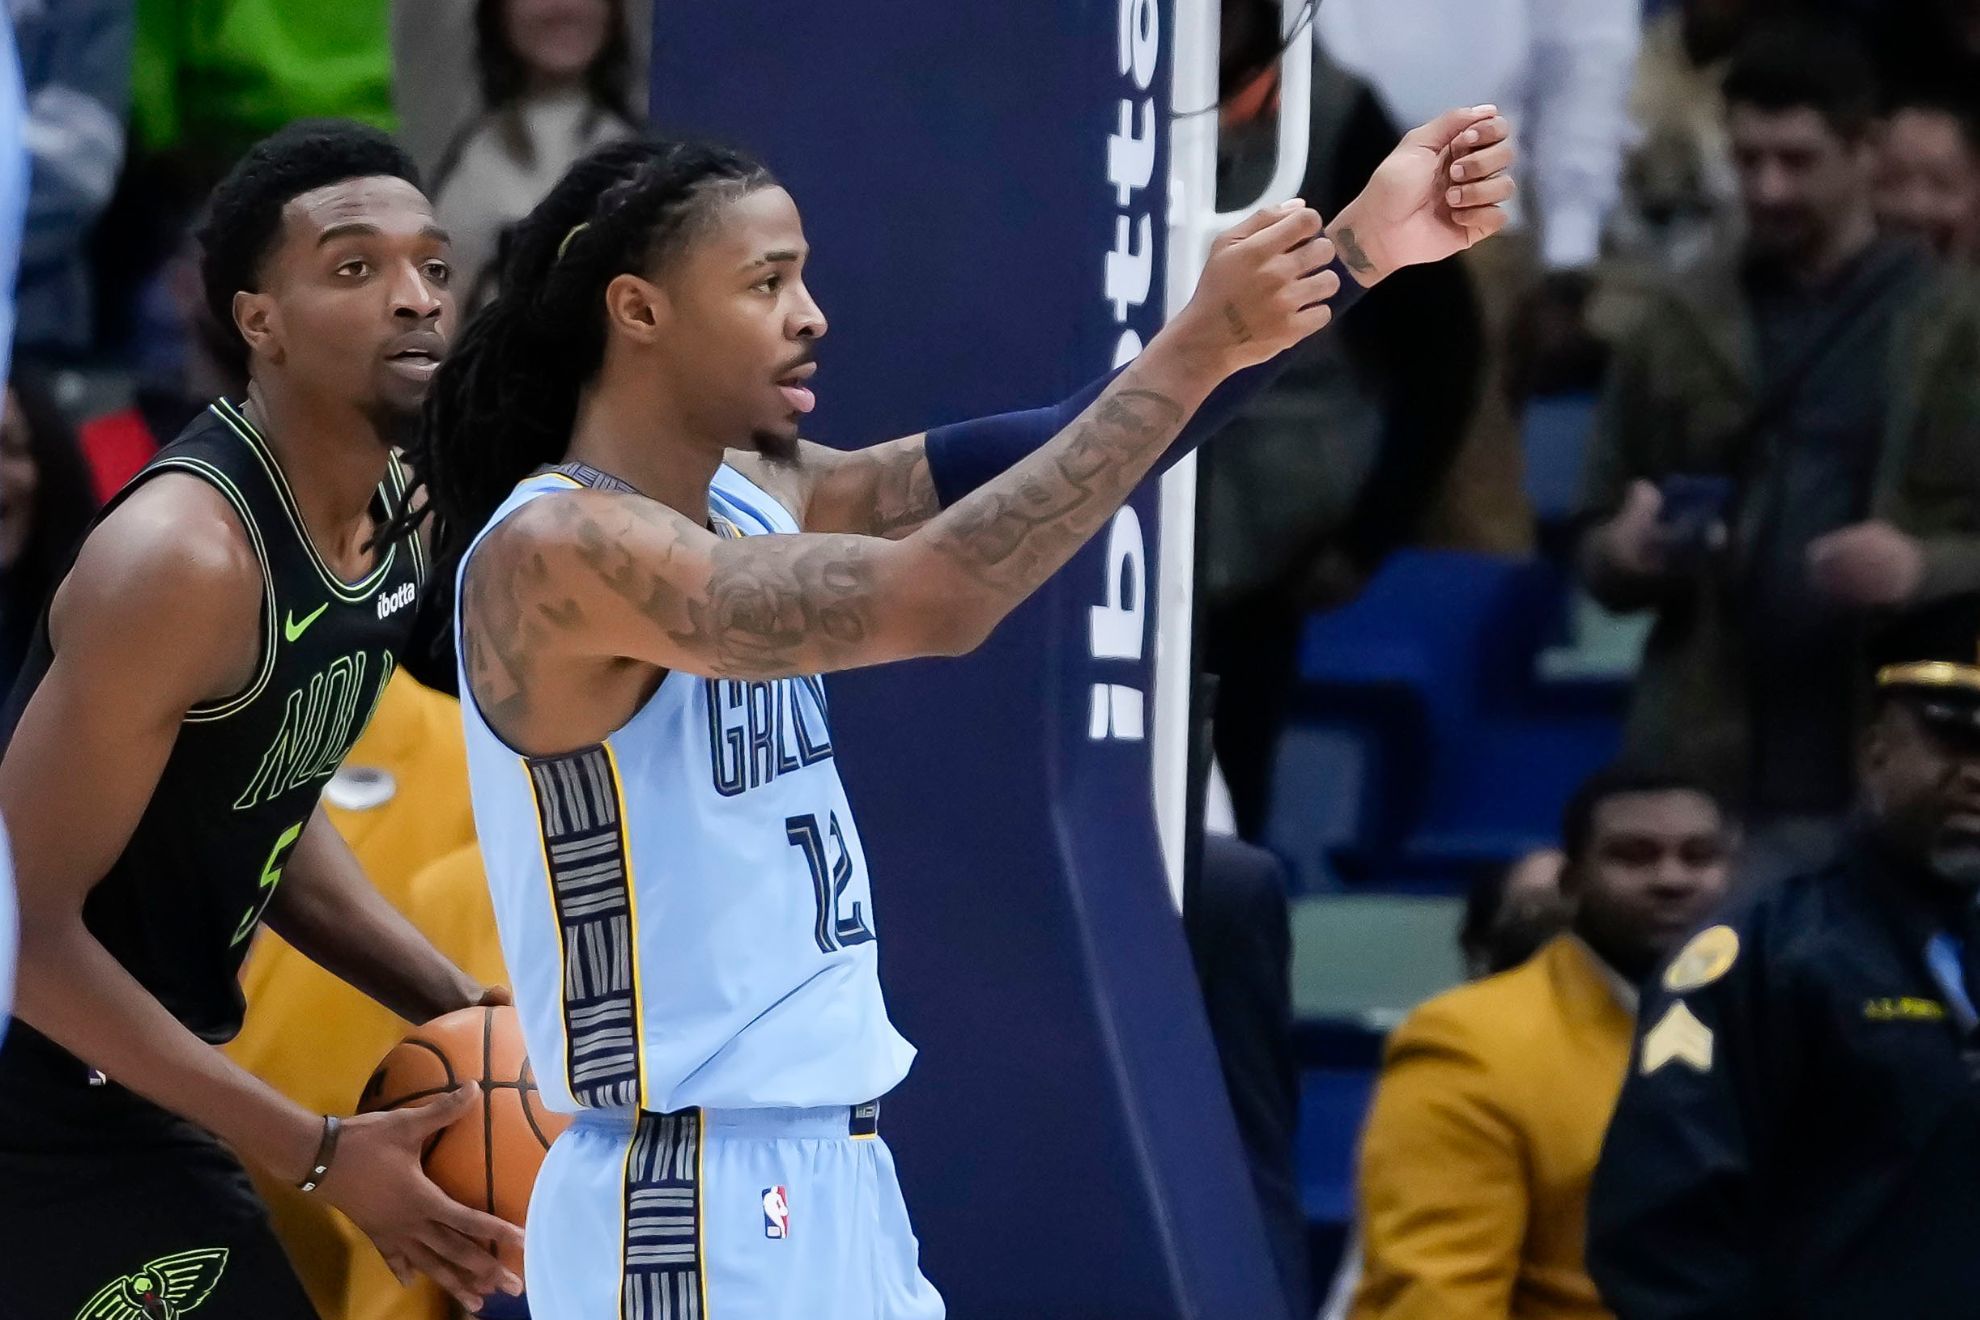 NBA fans are convinced Ja Morant shot imaginary bullets at crowd after game-winner